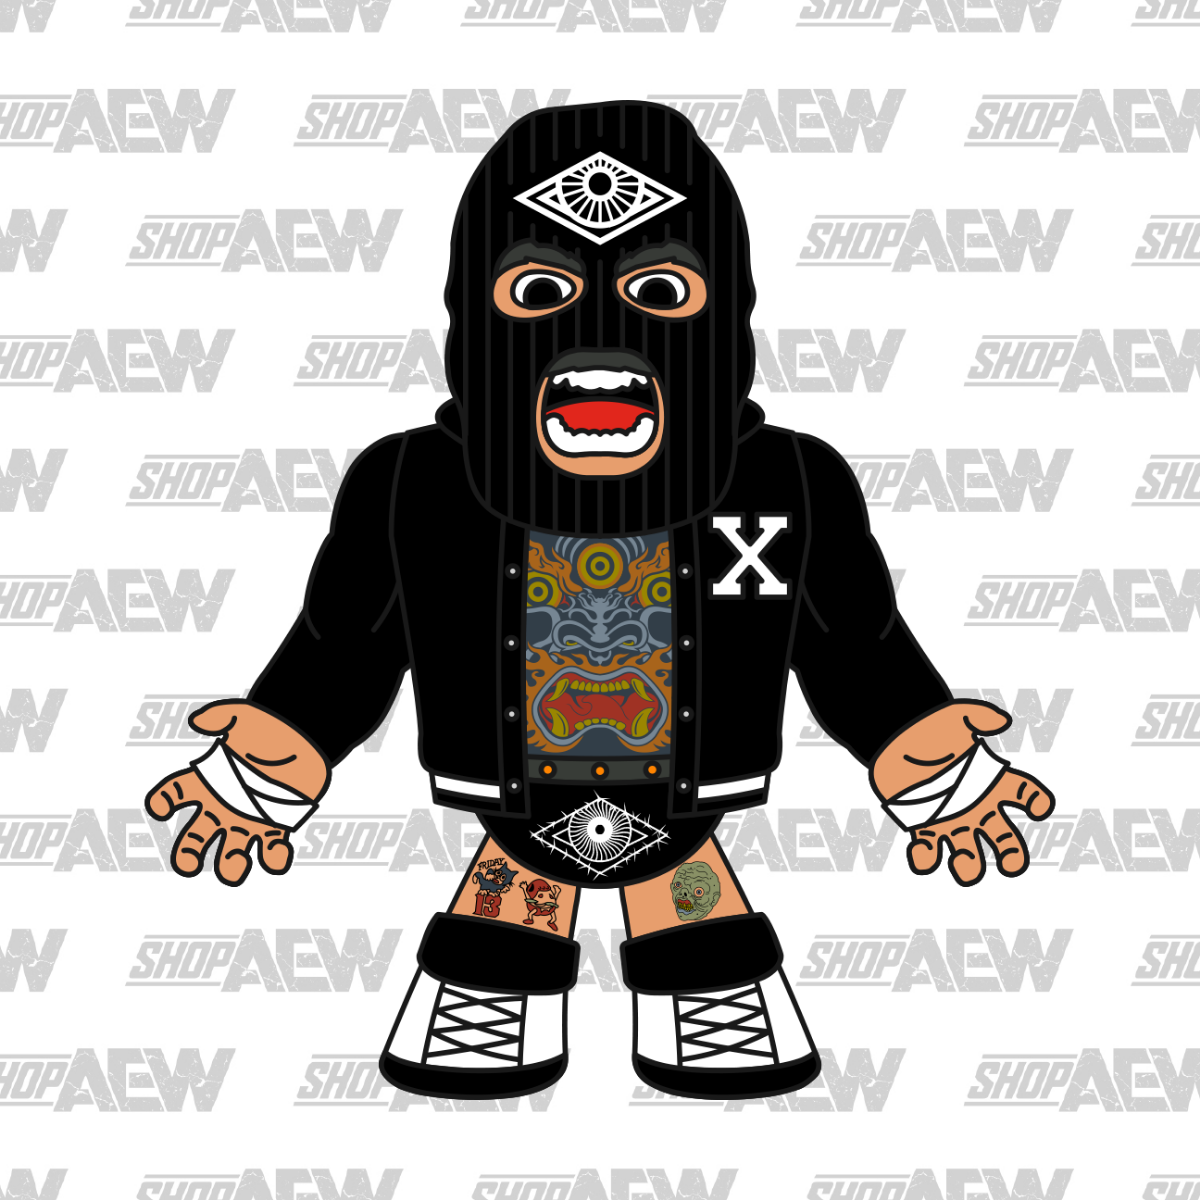 2022 AEW Pro Wrestling Tees Micro Brawlers Limited Edition Brody King